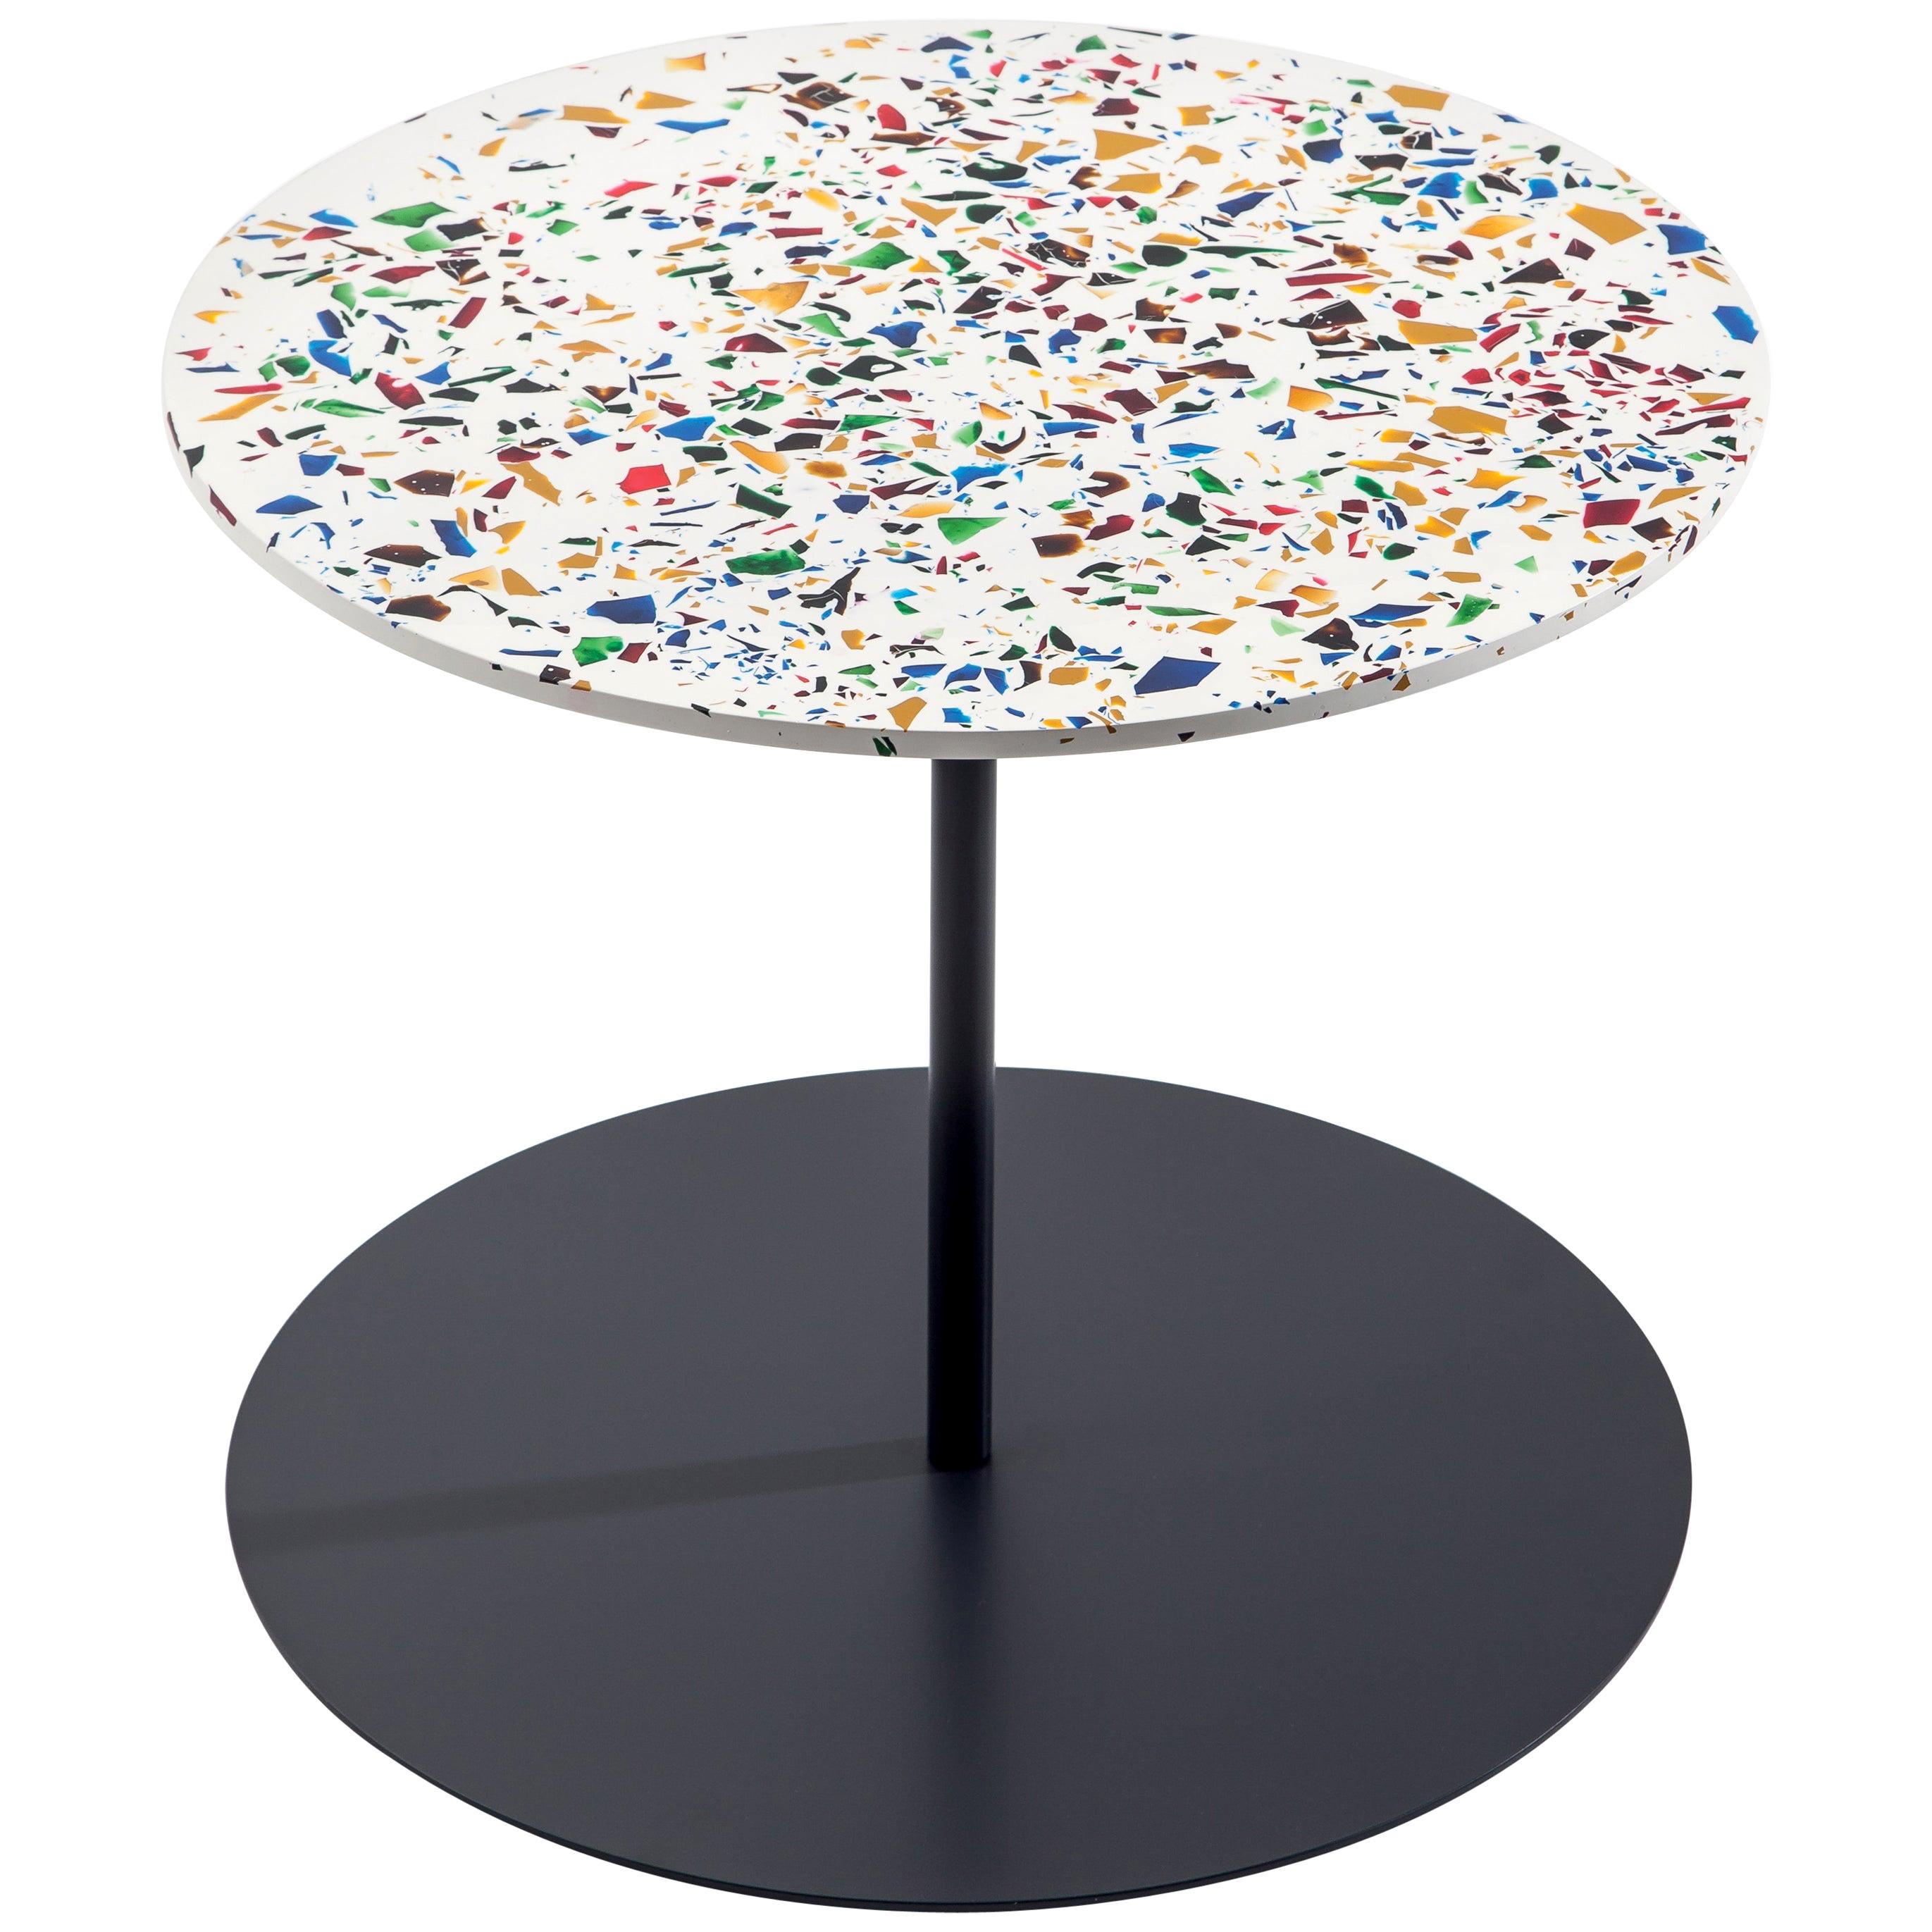 Gong Terrazzo Table in Varnished Anthracite Base by Giulio Cappellini